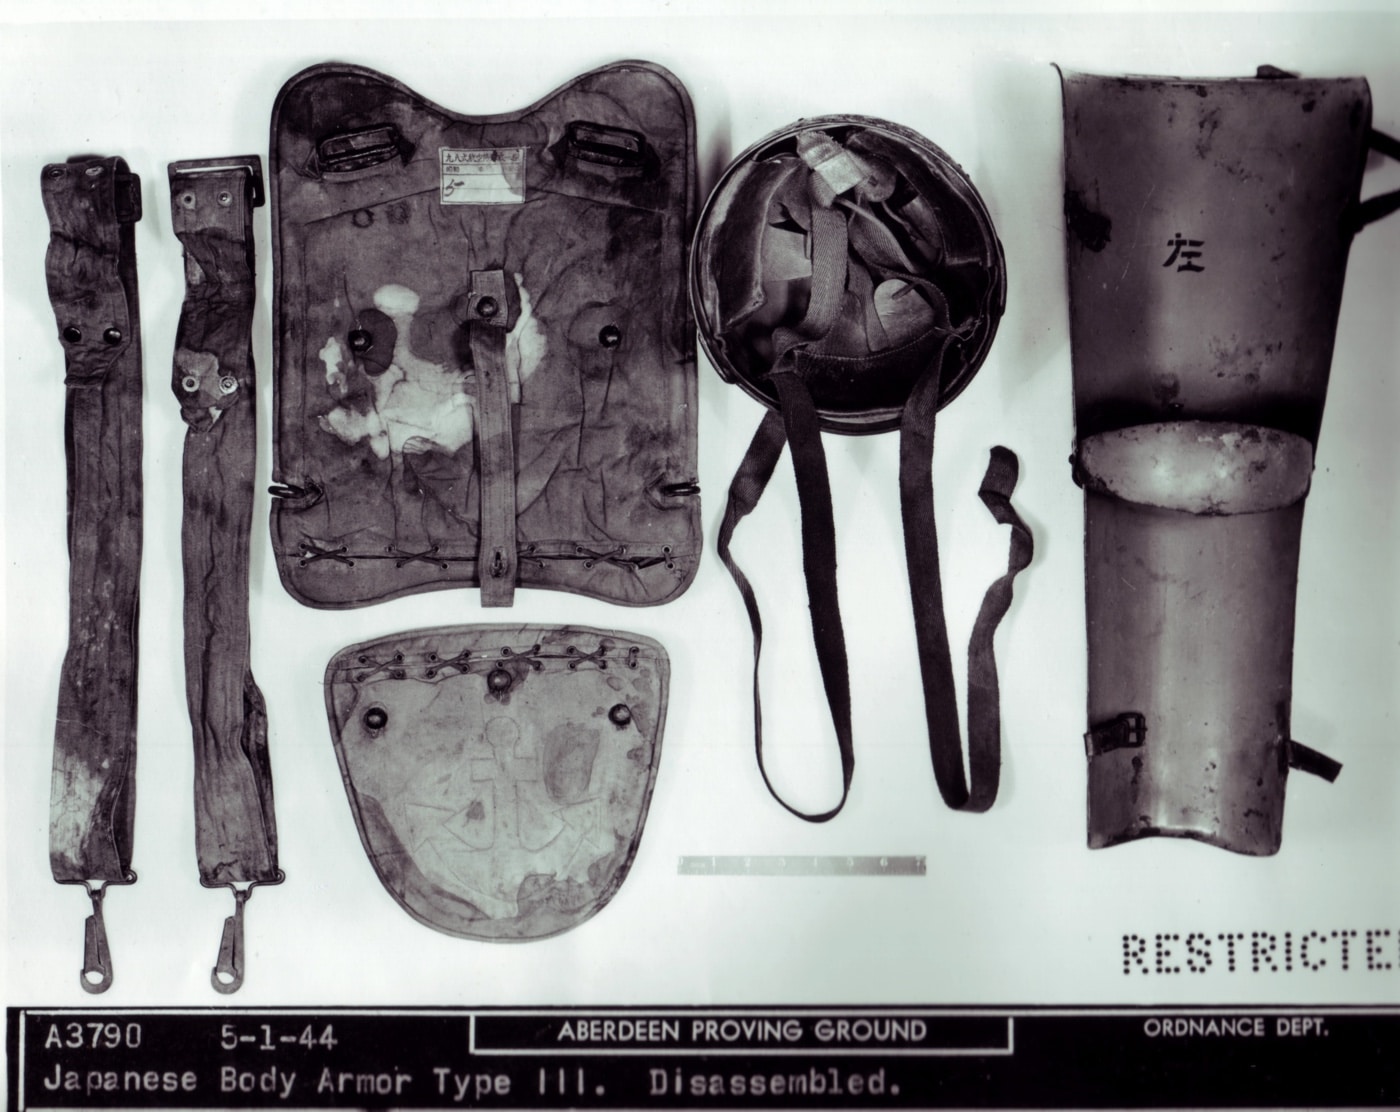 In this photo from the National Archives and Records Administration, we see an Imperial Japanese Army bulletproof vest set known as the Type III. This Japanese armor set included a metal leg shield that severely limited the mobility of the soldier wearing it.